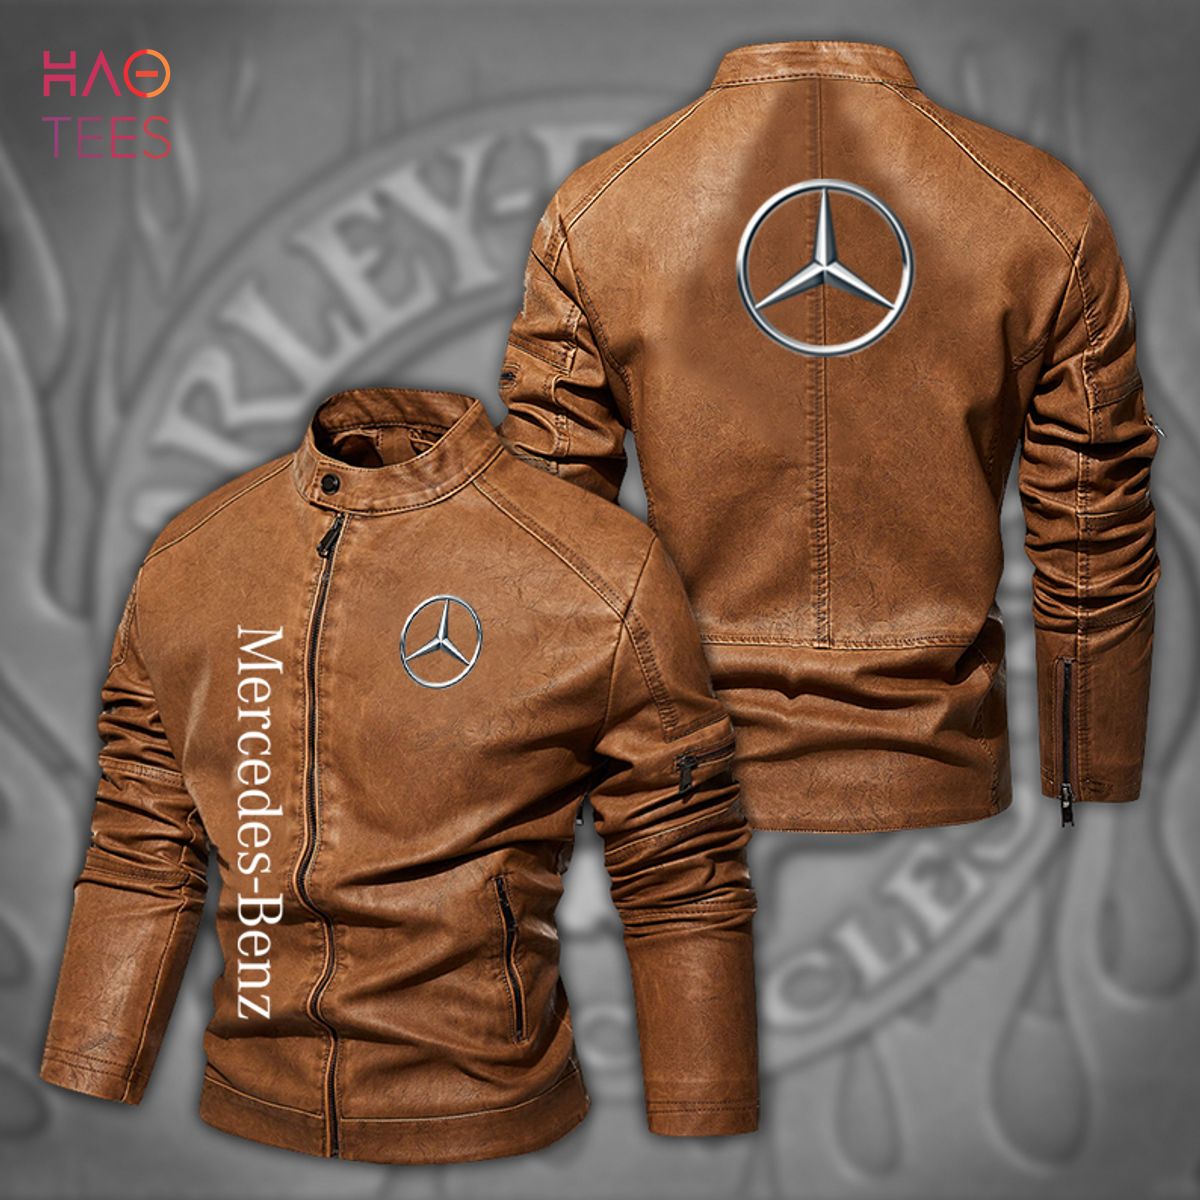 Mercedes Men’s Limited Edition New Leather Jacket